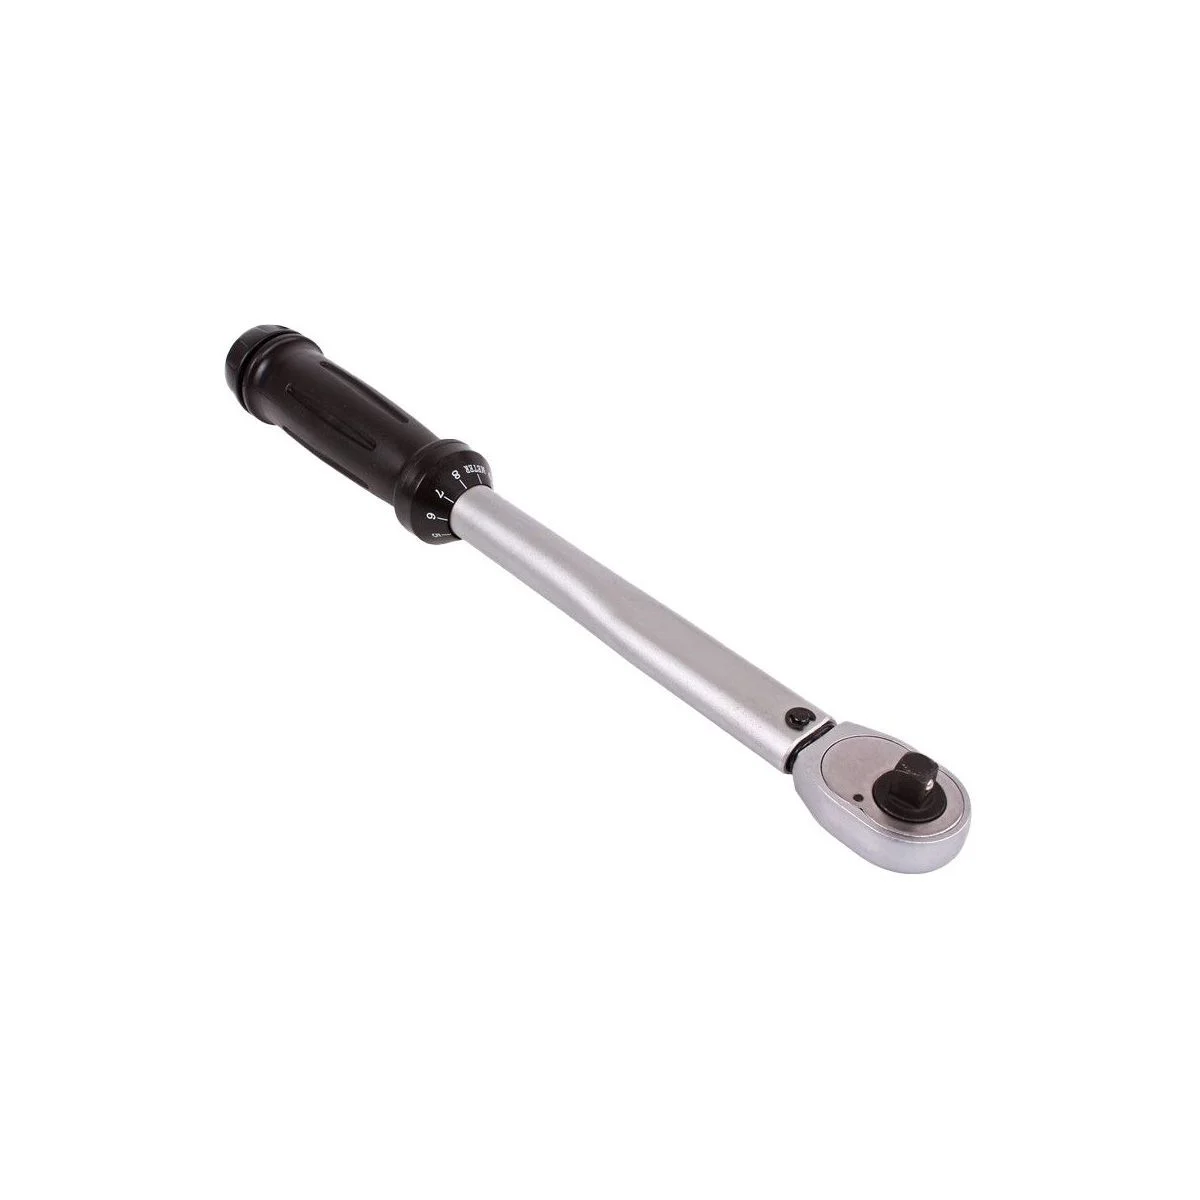 Torque%20Wrench%203/8%2010-60%20Nm